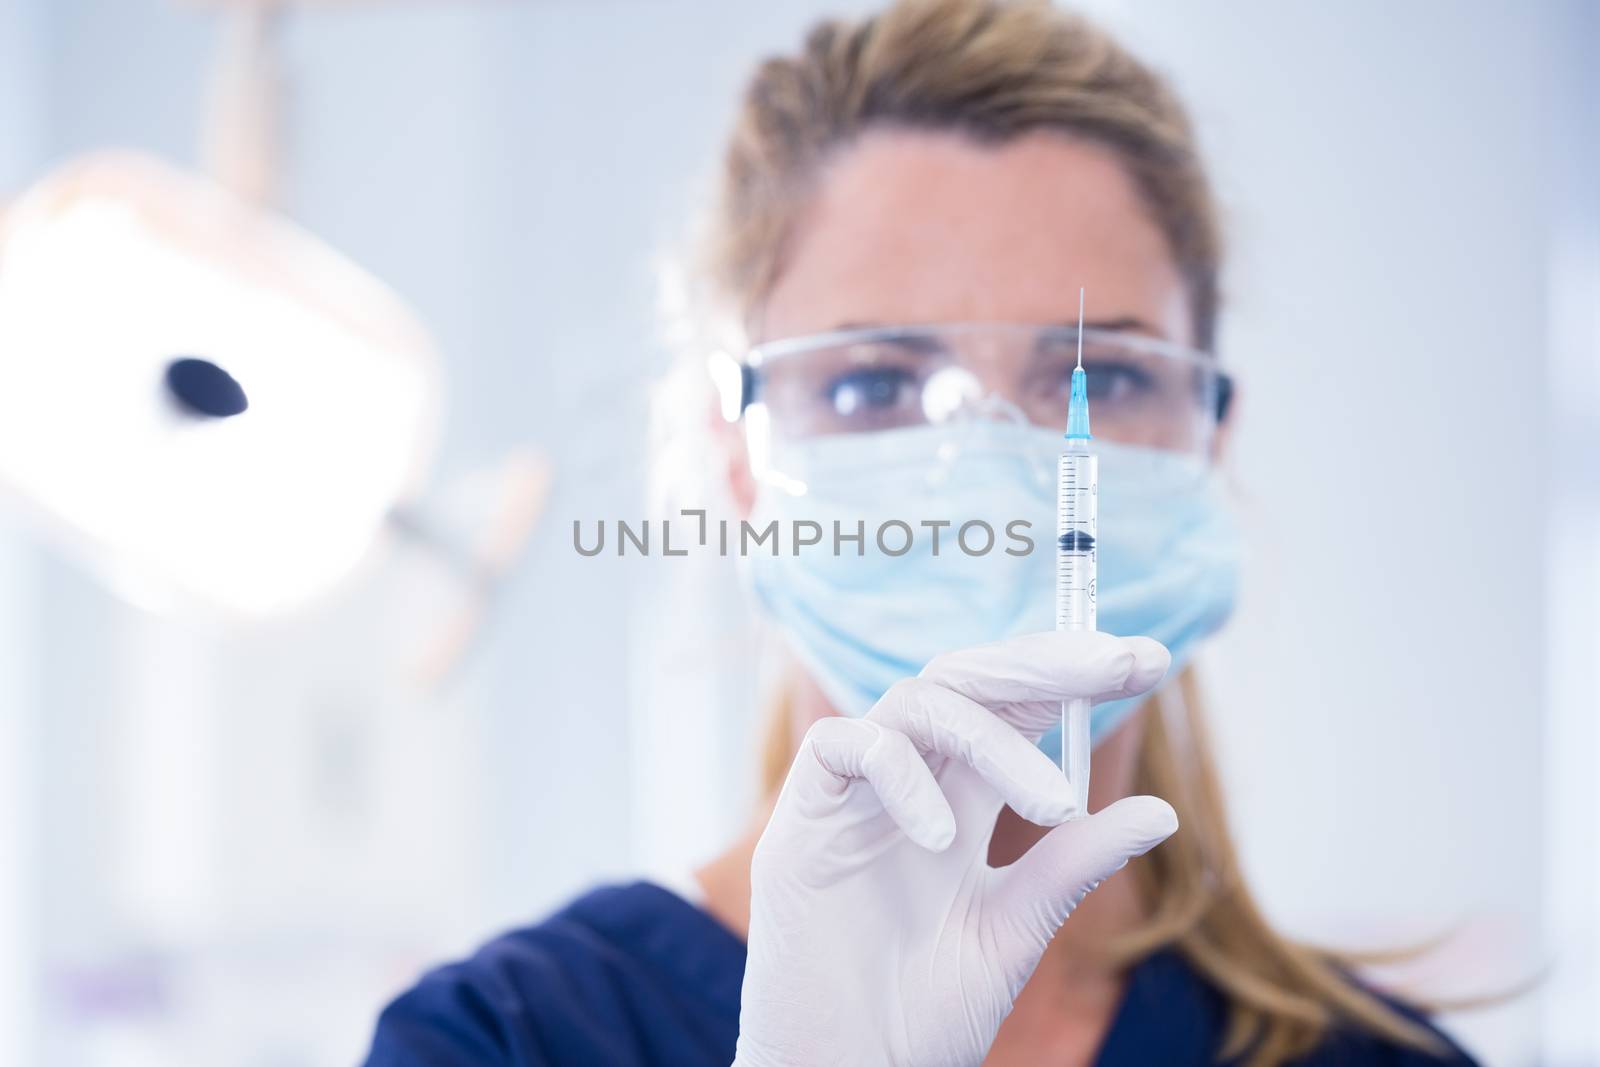 Dentist in mask and glove holding an injection by Wavebreakmedia